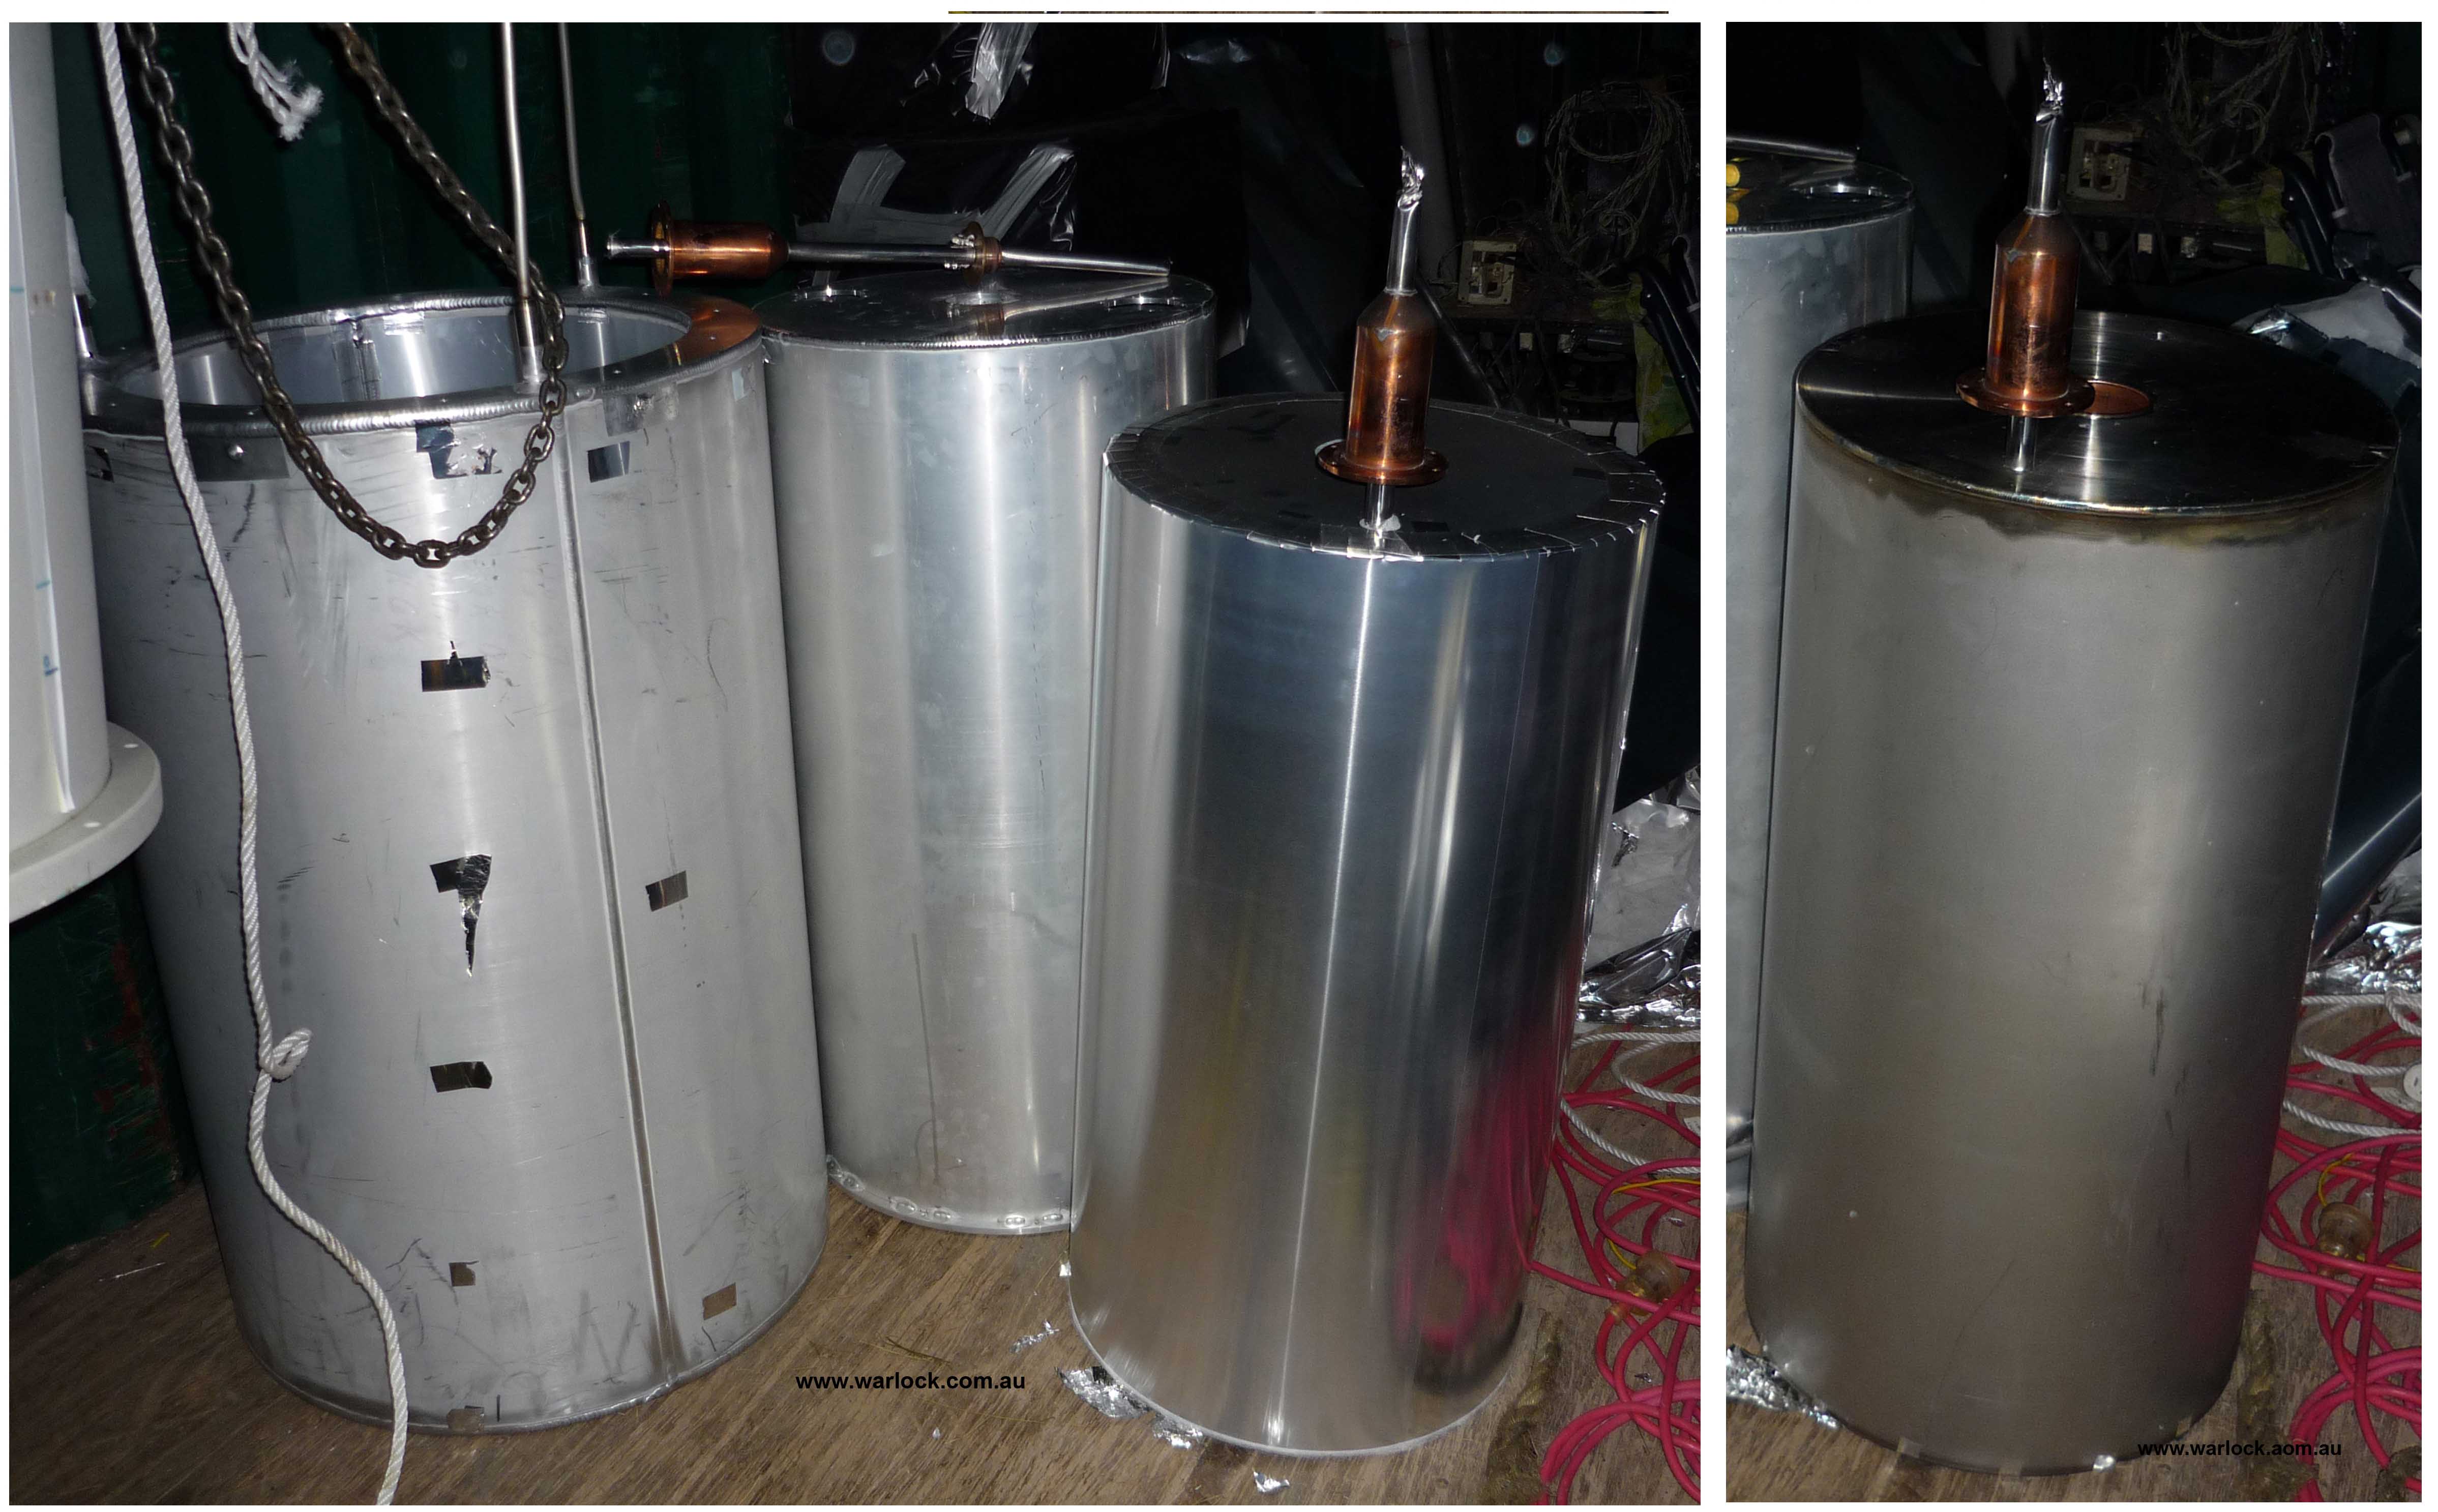 The 3 cylinders separated easily. The outside one is the 'Liquid Nitrogen Vessel' that attaches to the outermost fill tubes. The centre one is a '4 K Radiation Shield' that blocks infra-red radiation from reaching the 'Liquid Helium Vessel' on the inside.